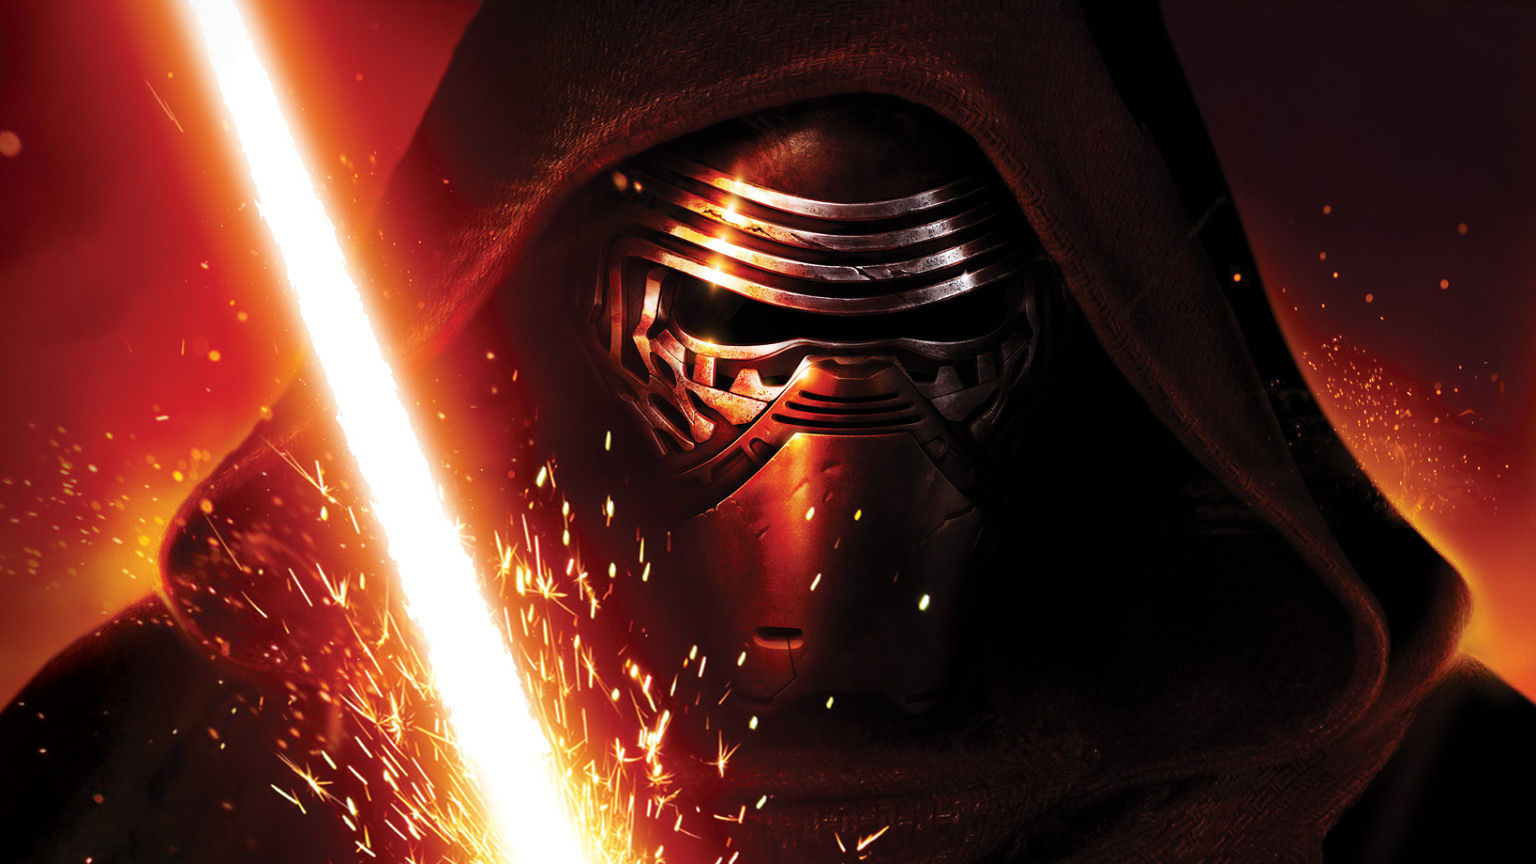 kylo ren wallpaper We provide the best collection of HD wallpapers